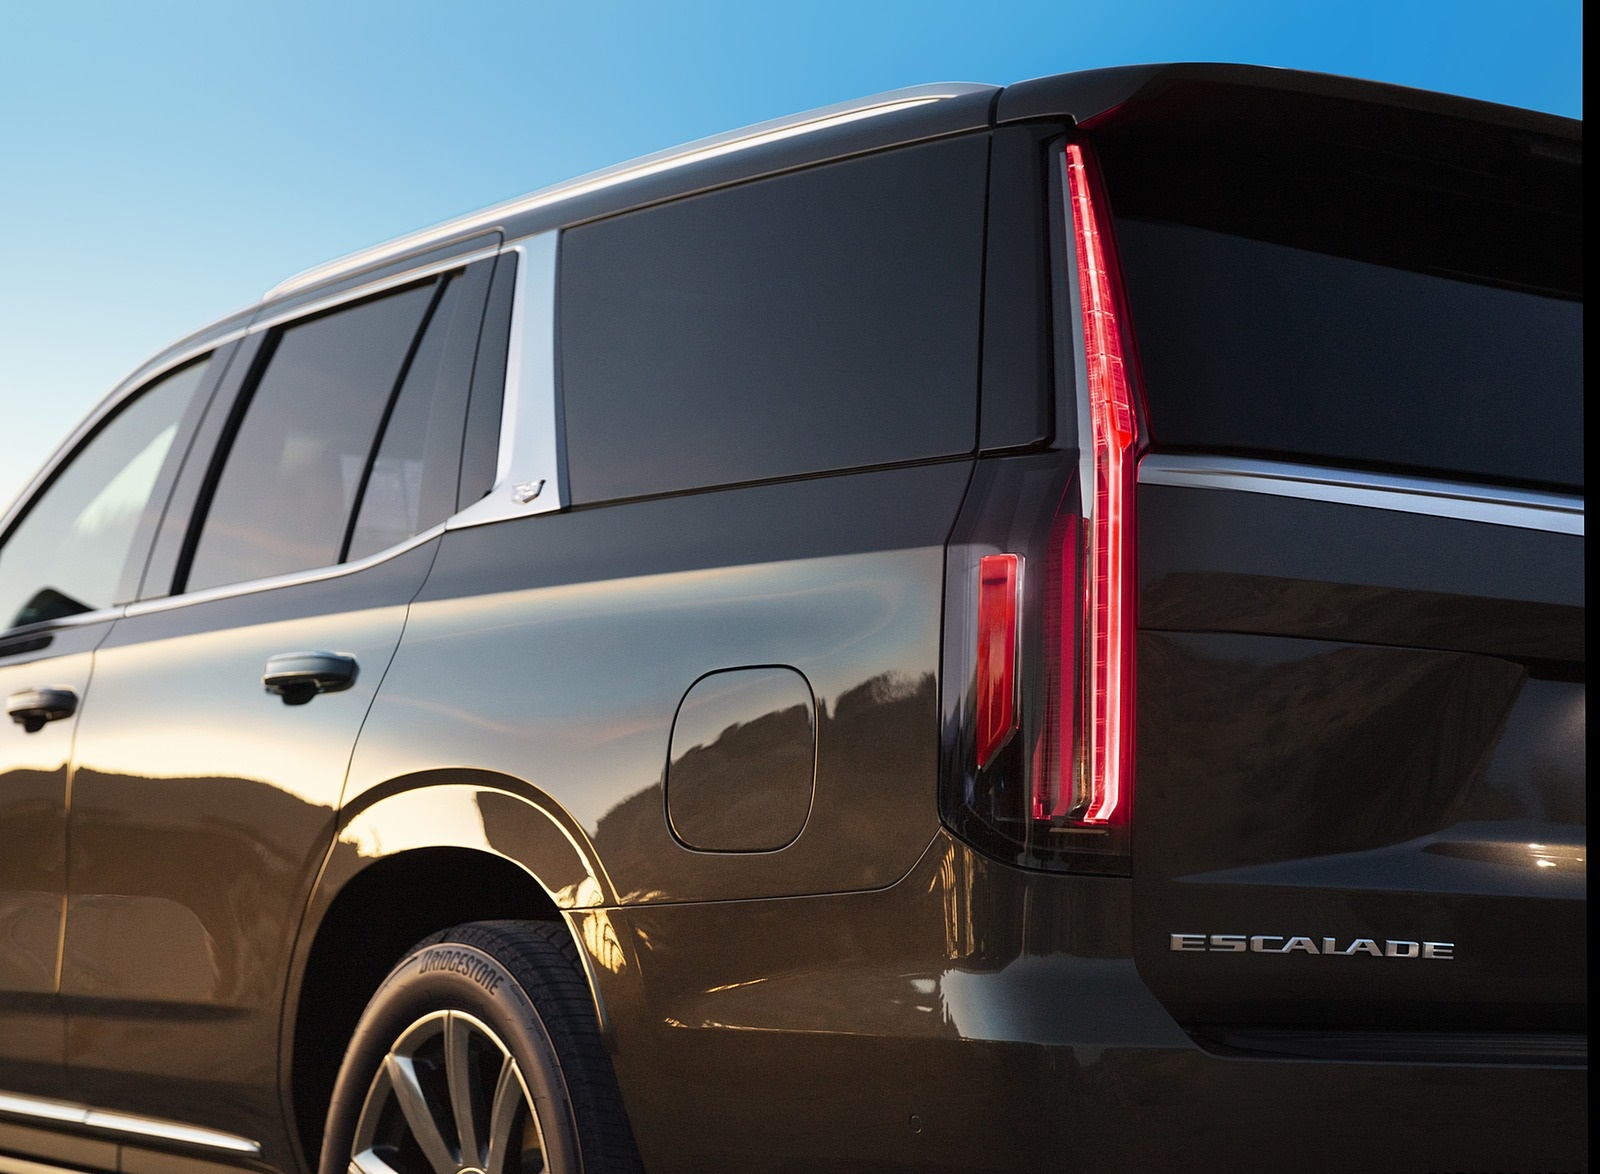 2021 Cadillac Escalade Tail Light Wallpapers #32 of 100